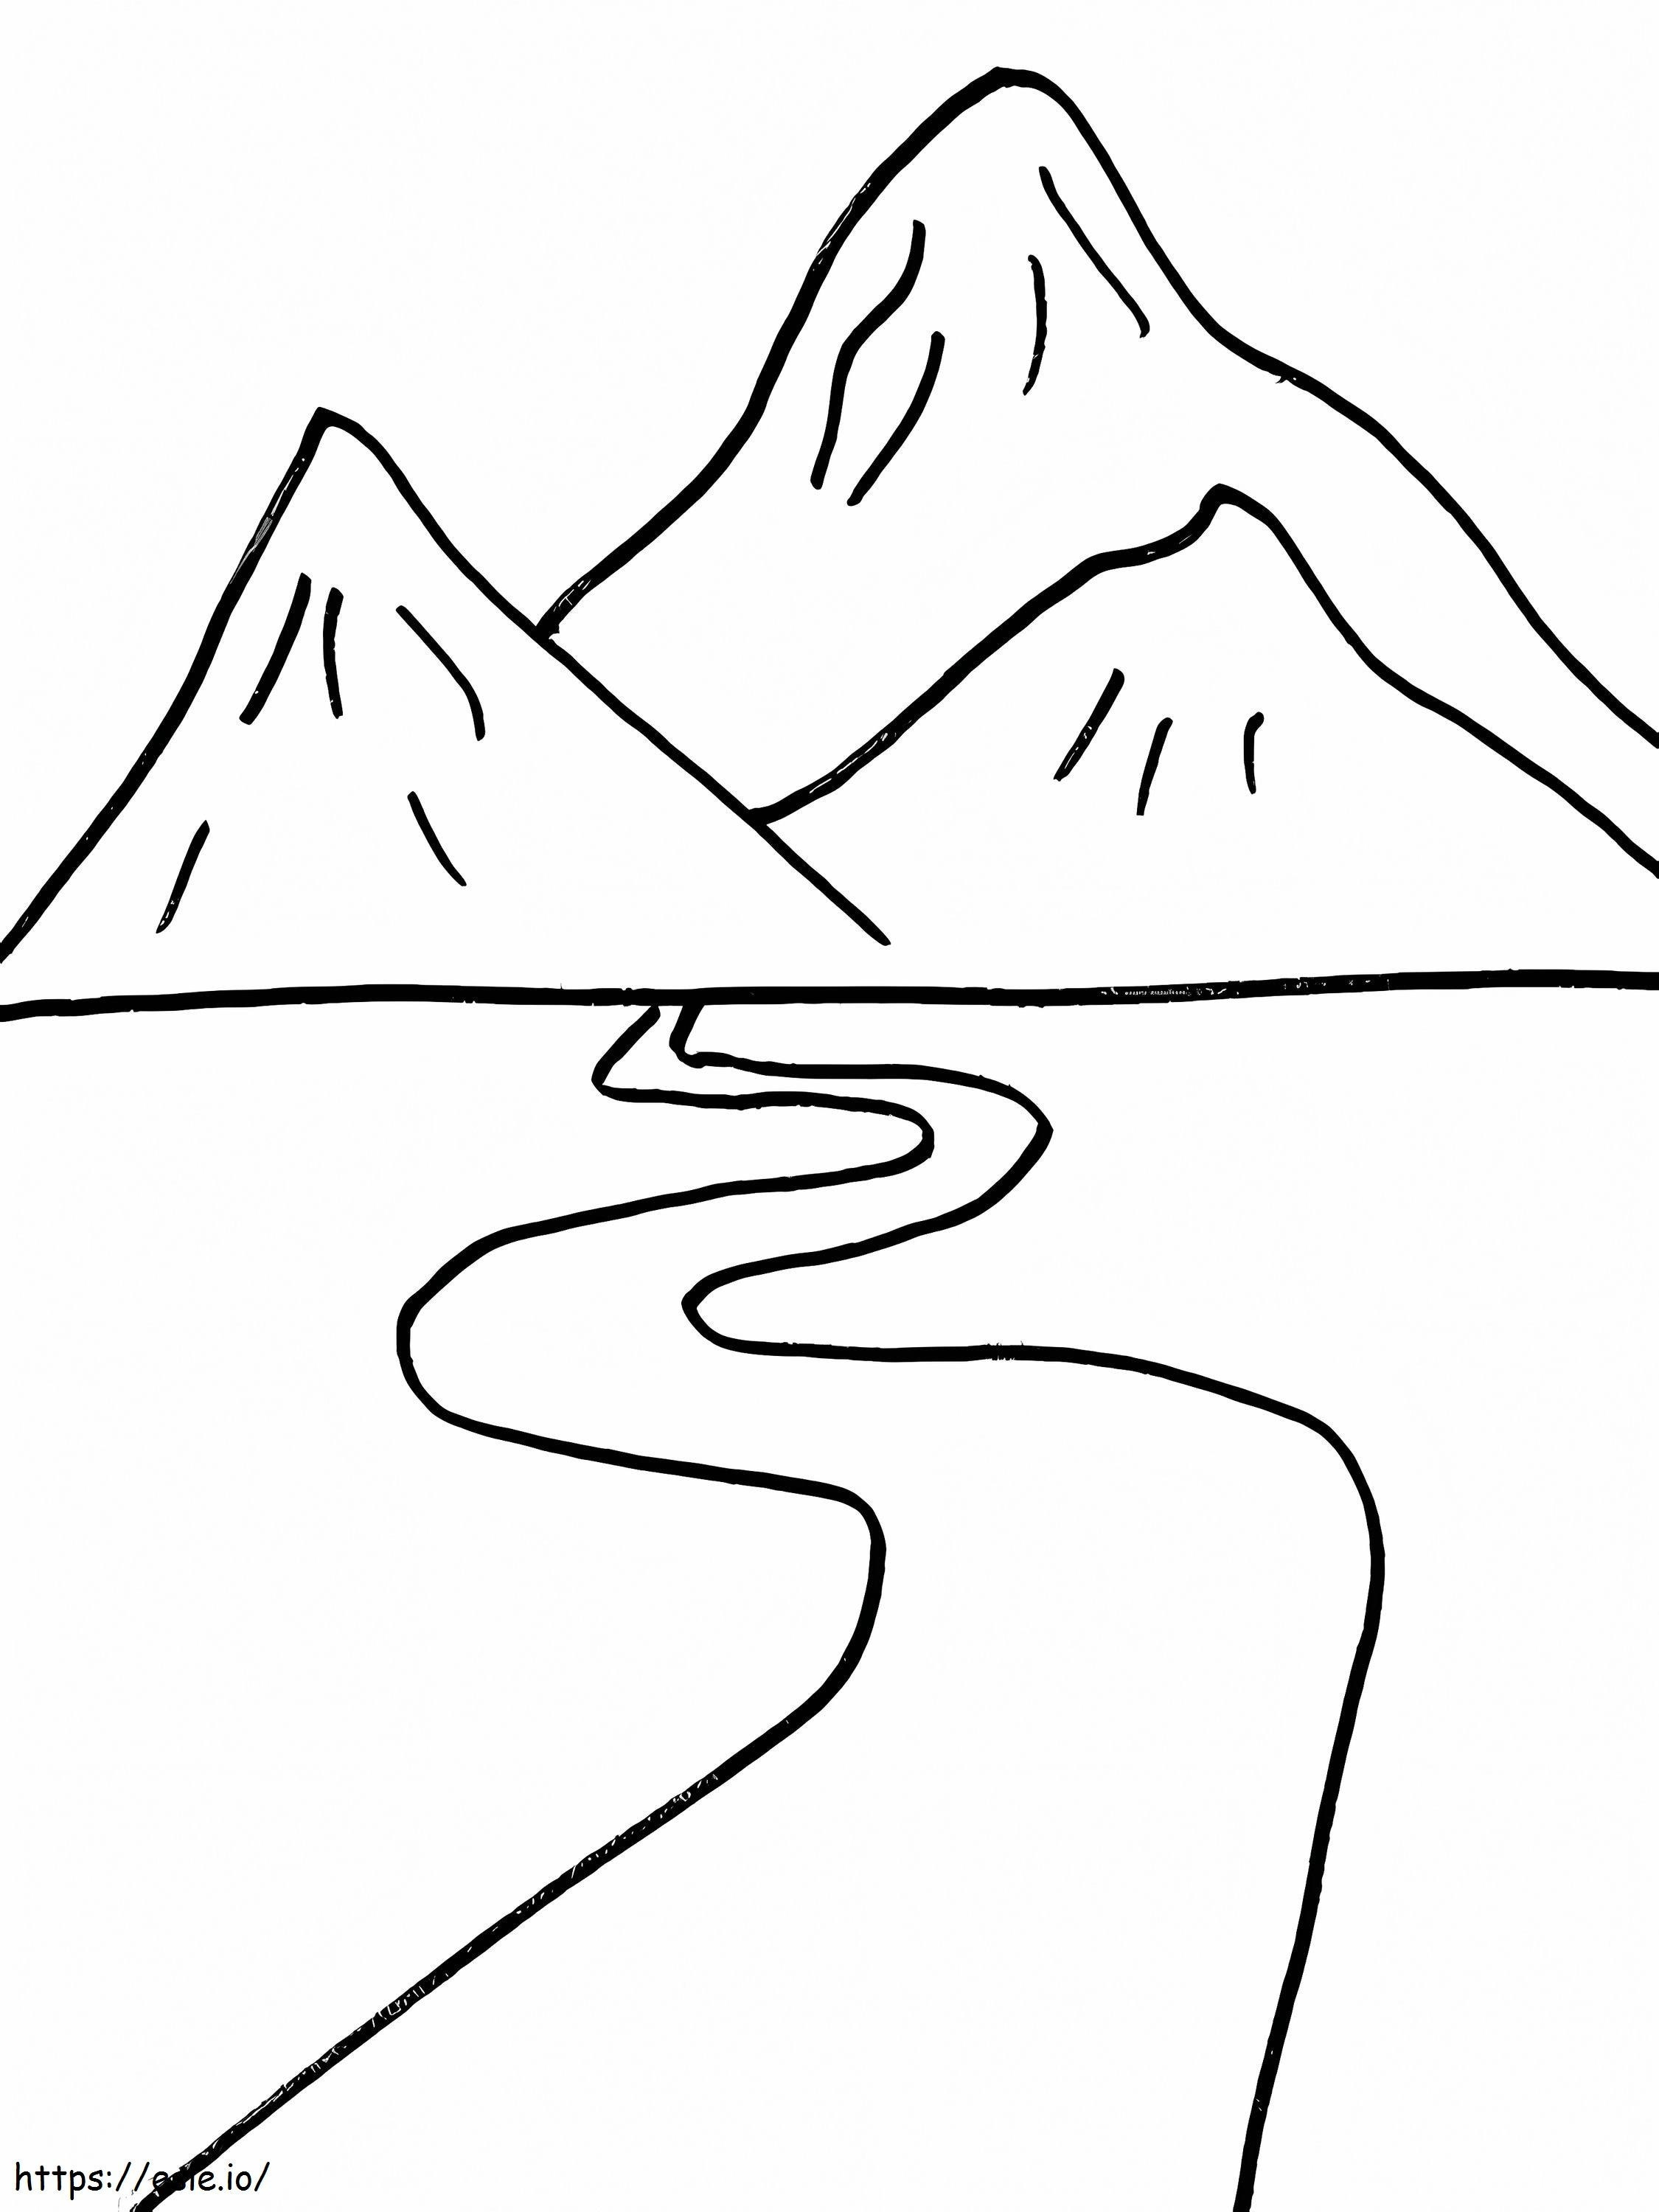 Easy River And Mountains coloring page